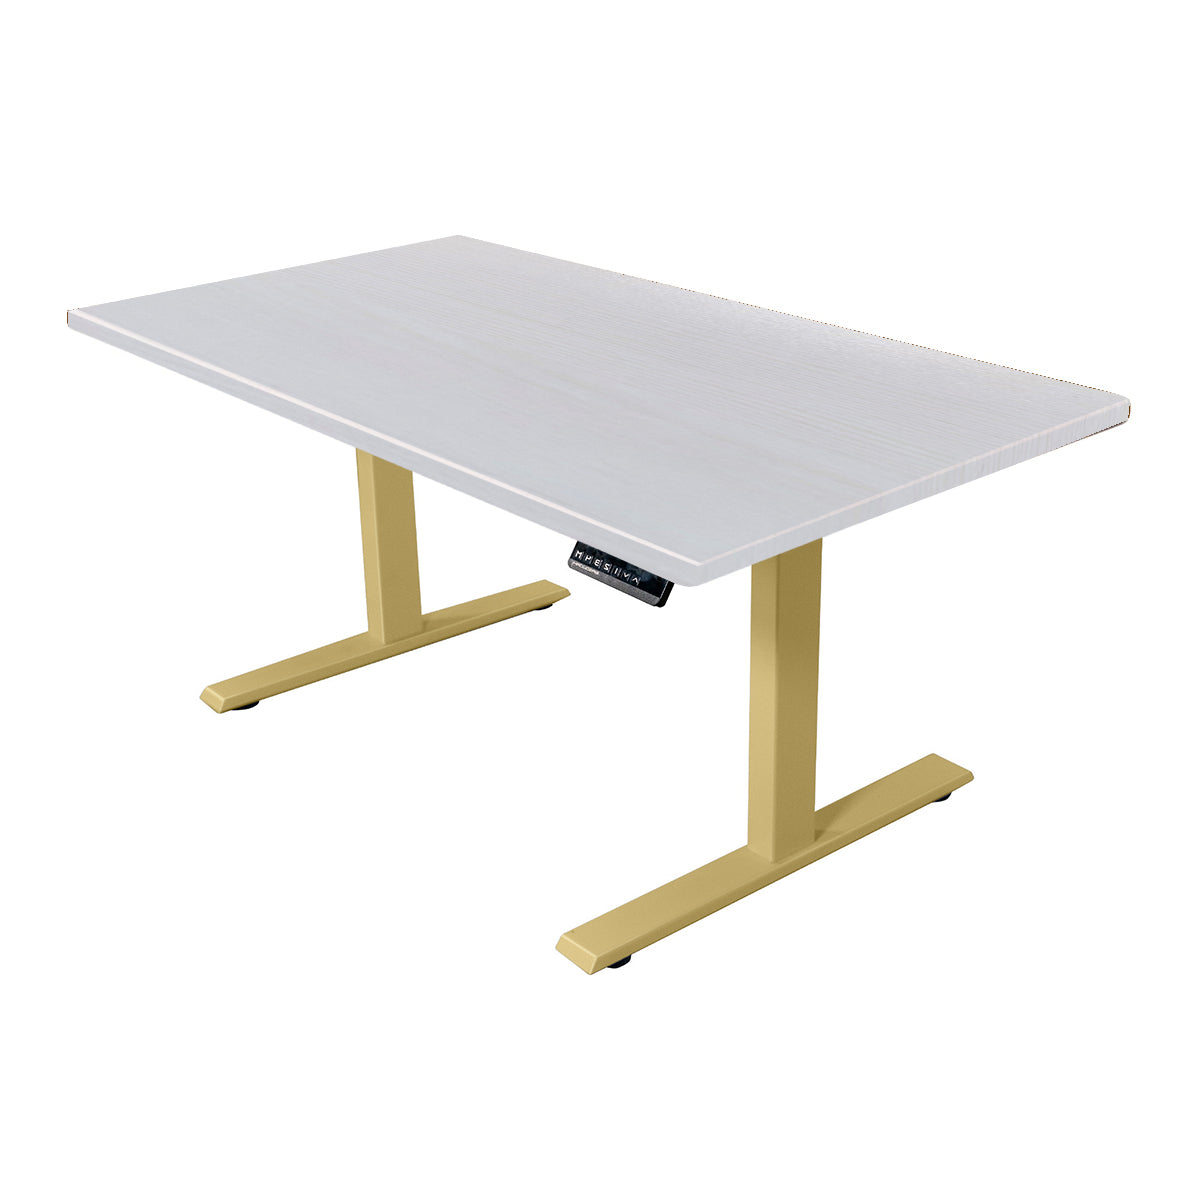 Electric Height Adjustable Desk with Customize Tabletop Dimension